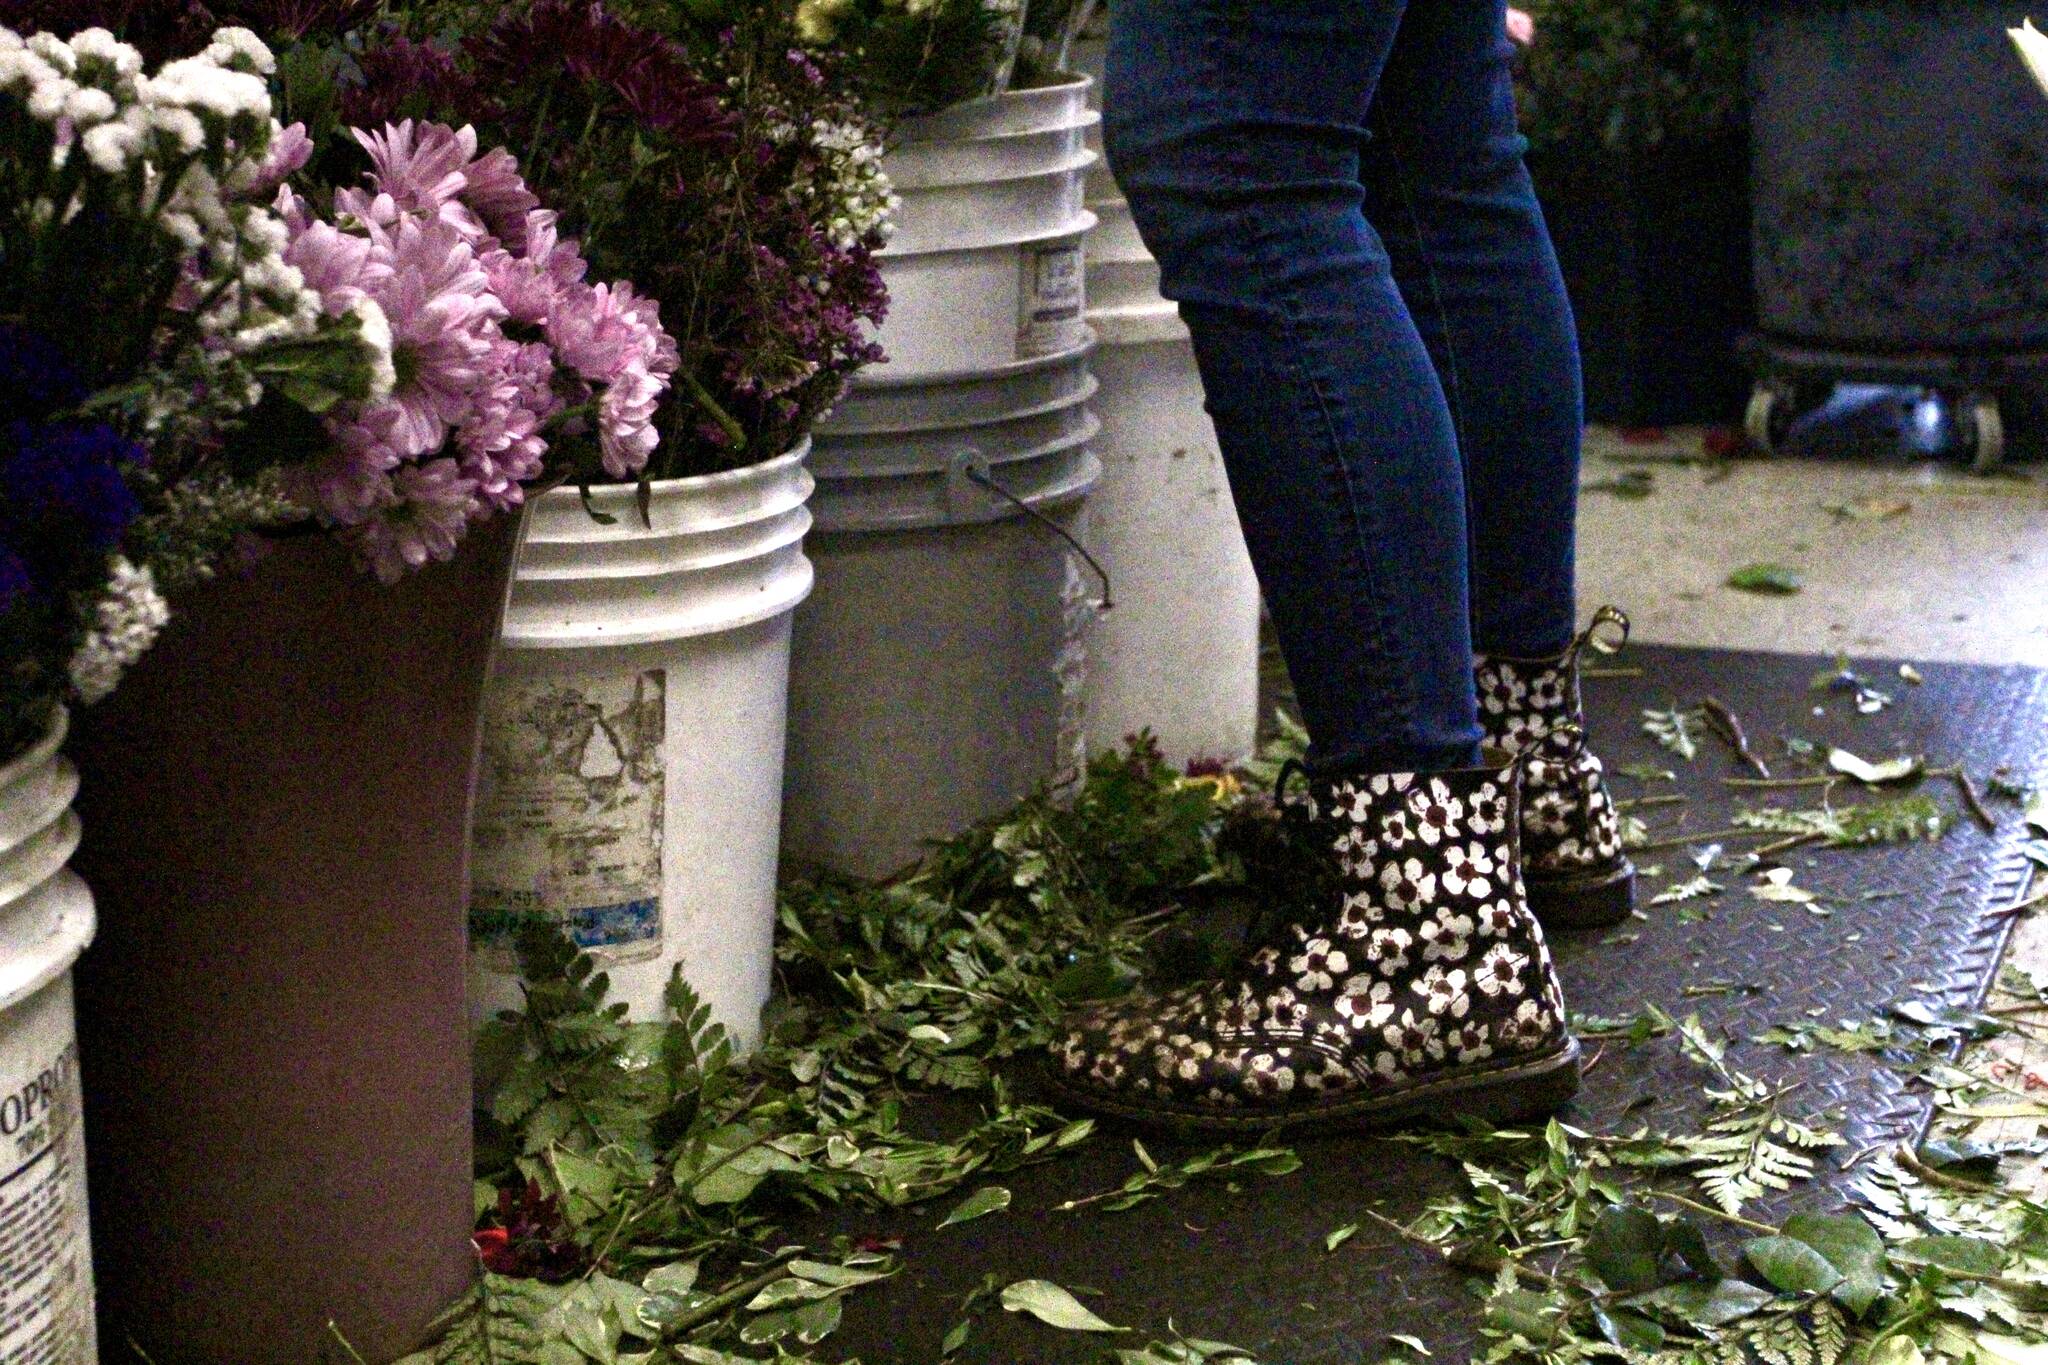 Employee Brianna Sterling dons flowery boots while building flower bouquets on Valentine’s Day. Olivia Sullivan / the Mirror